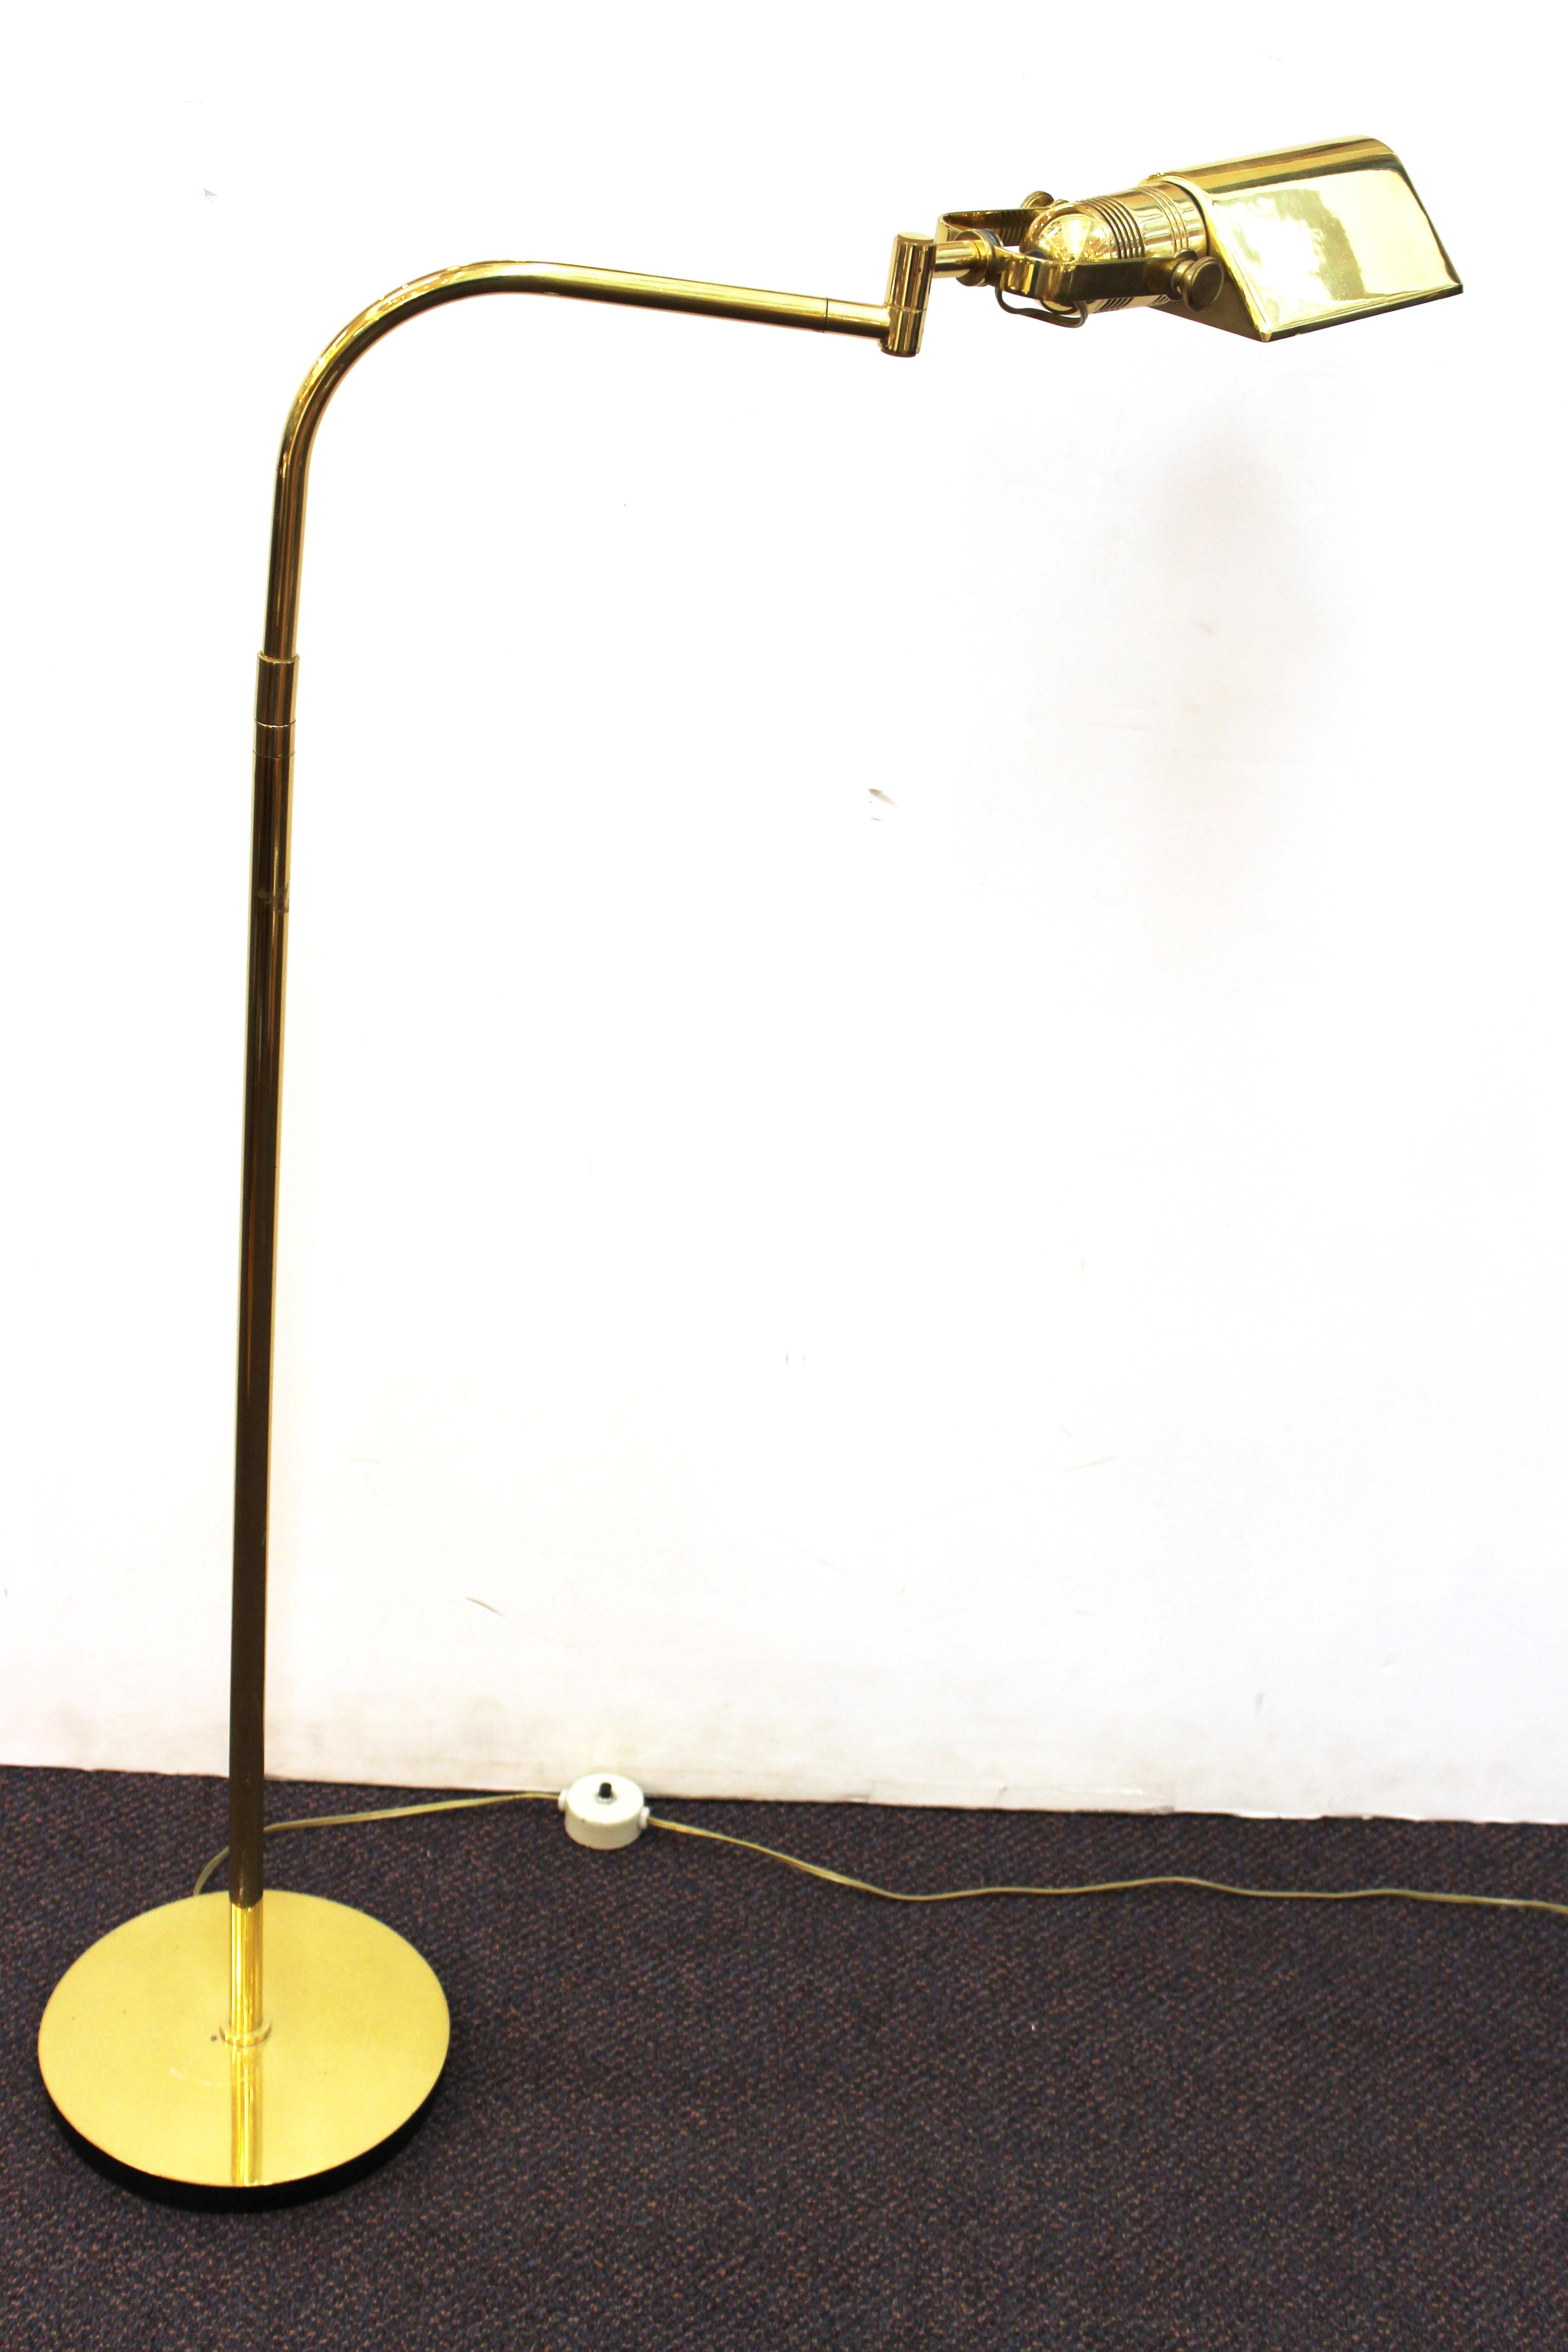 Pair of Mid-Century Modern reading lamps or floor lamps, made in brass by Nessen Studio. The pair has articulated heads and adjustable height and is in great vintage condition with age-appropriate wear to the metal patina.